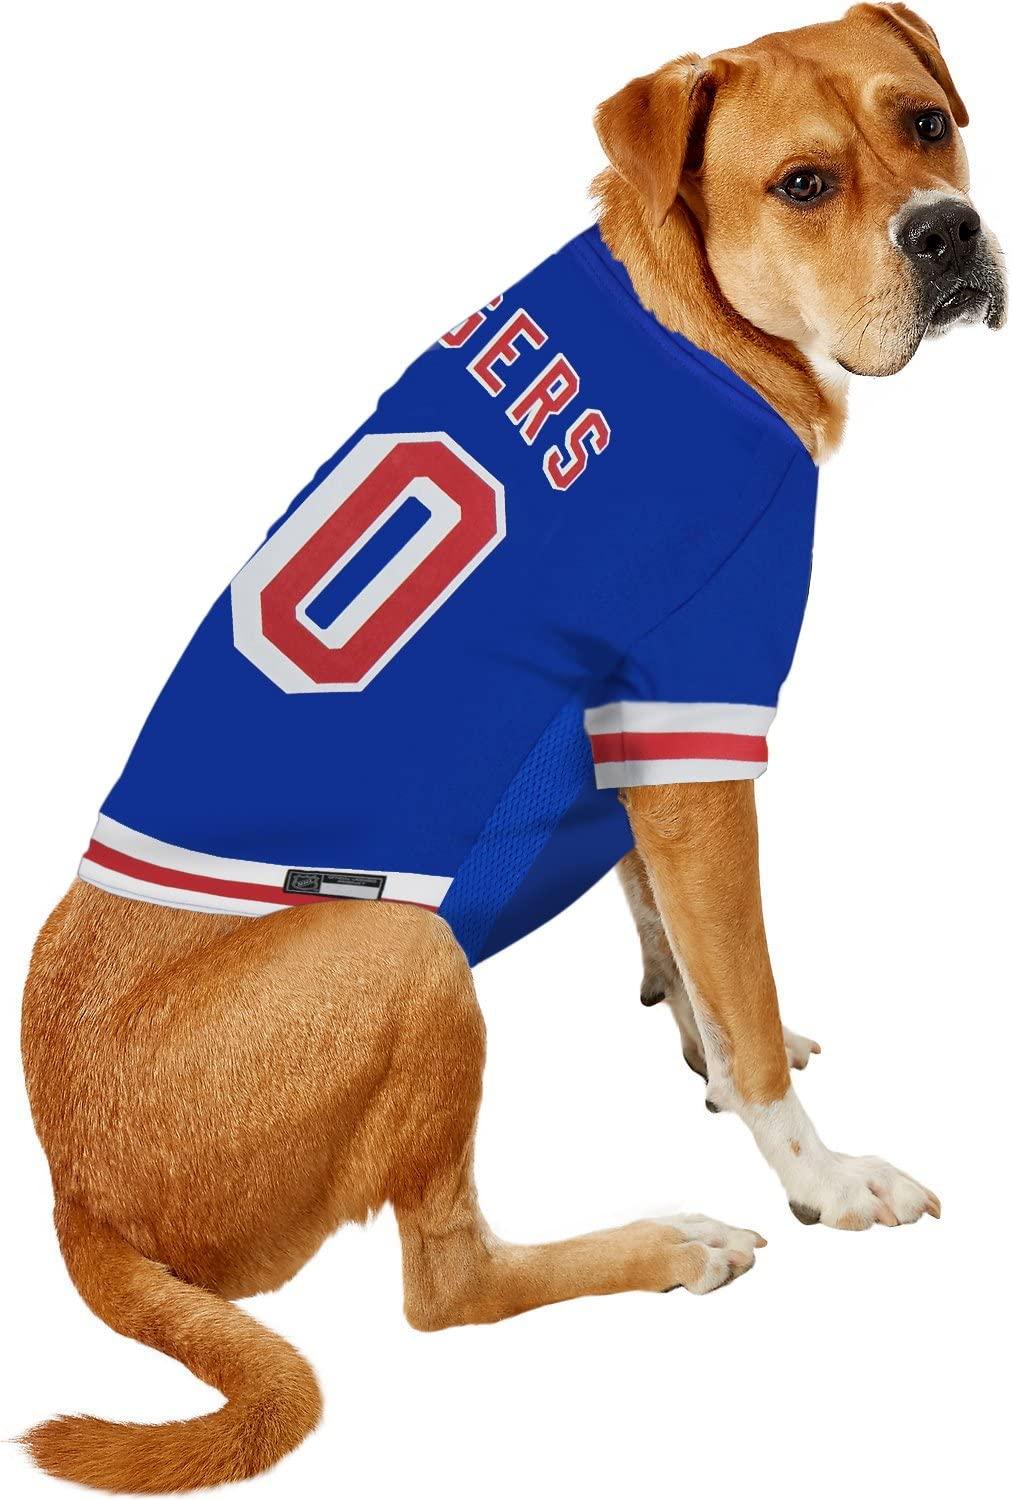 NHL New York Rangers Jersey for Dogs & Cats, Small. - Let Your Pet